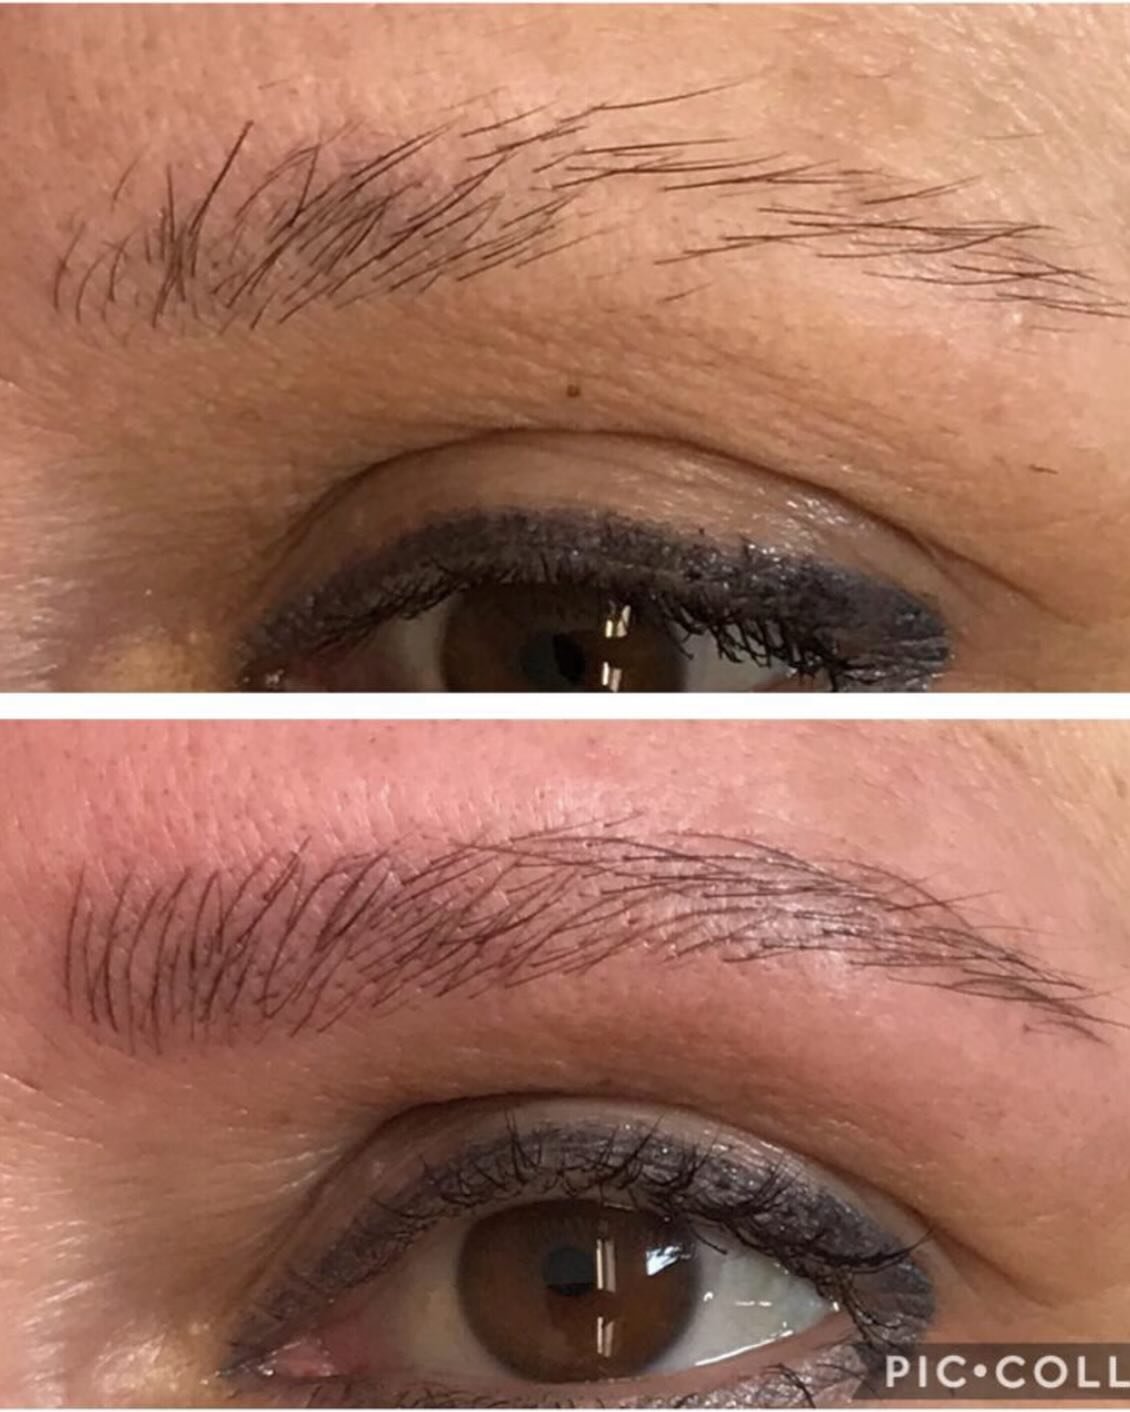 Before and after of microblading ✨ 

#microblading #eyebrows #augebrauen #sourcils #sobrancelhas #meilen #switzerland